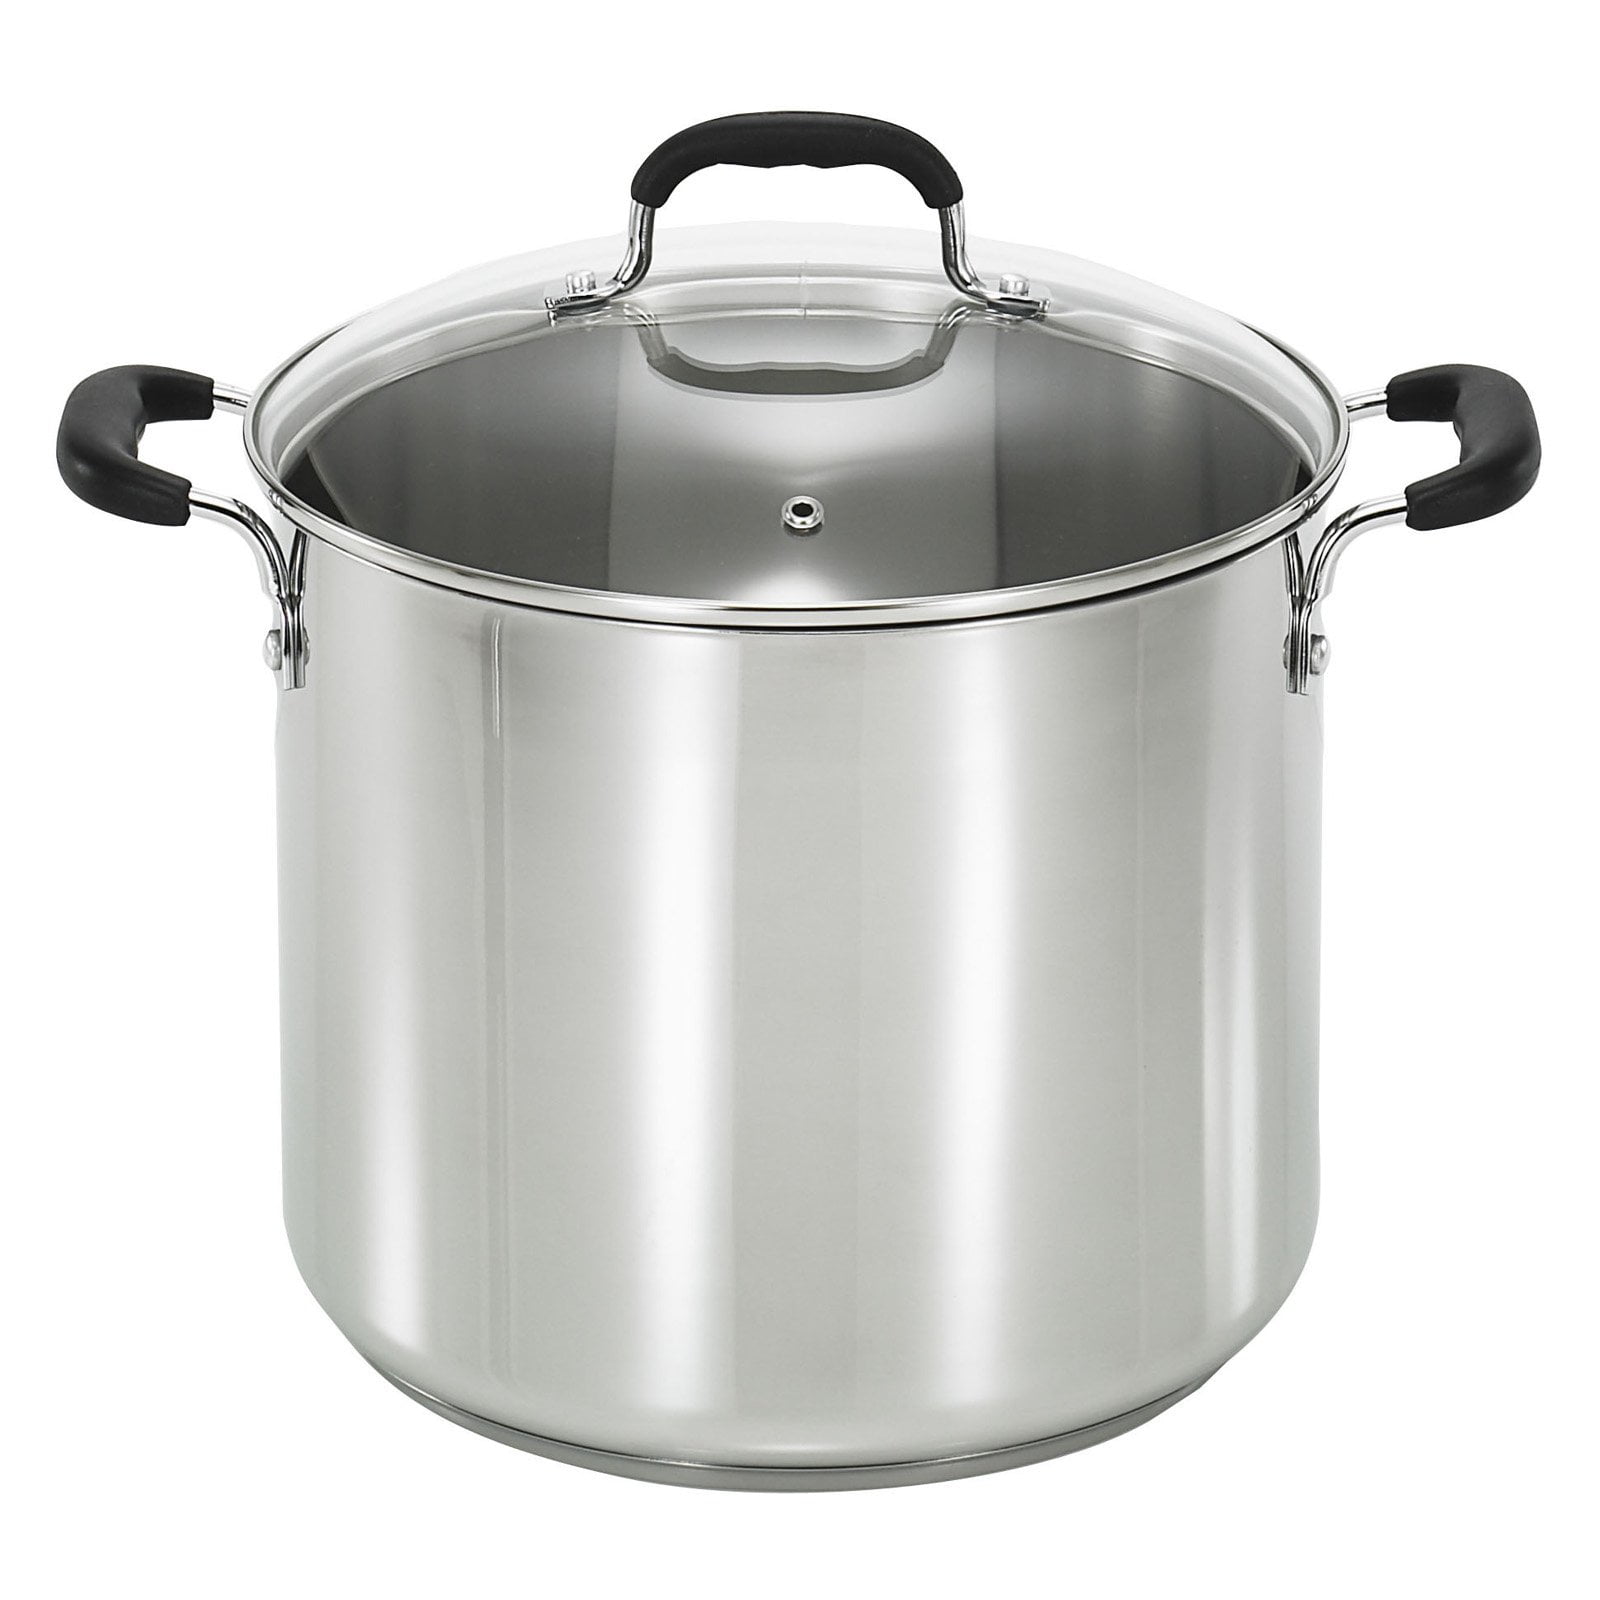 Stainless Steel 12 Quart Covered Stock Pot Cooking Kitchen Cook Food Clear Lid 